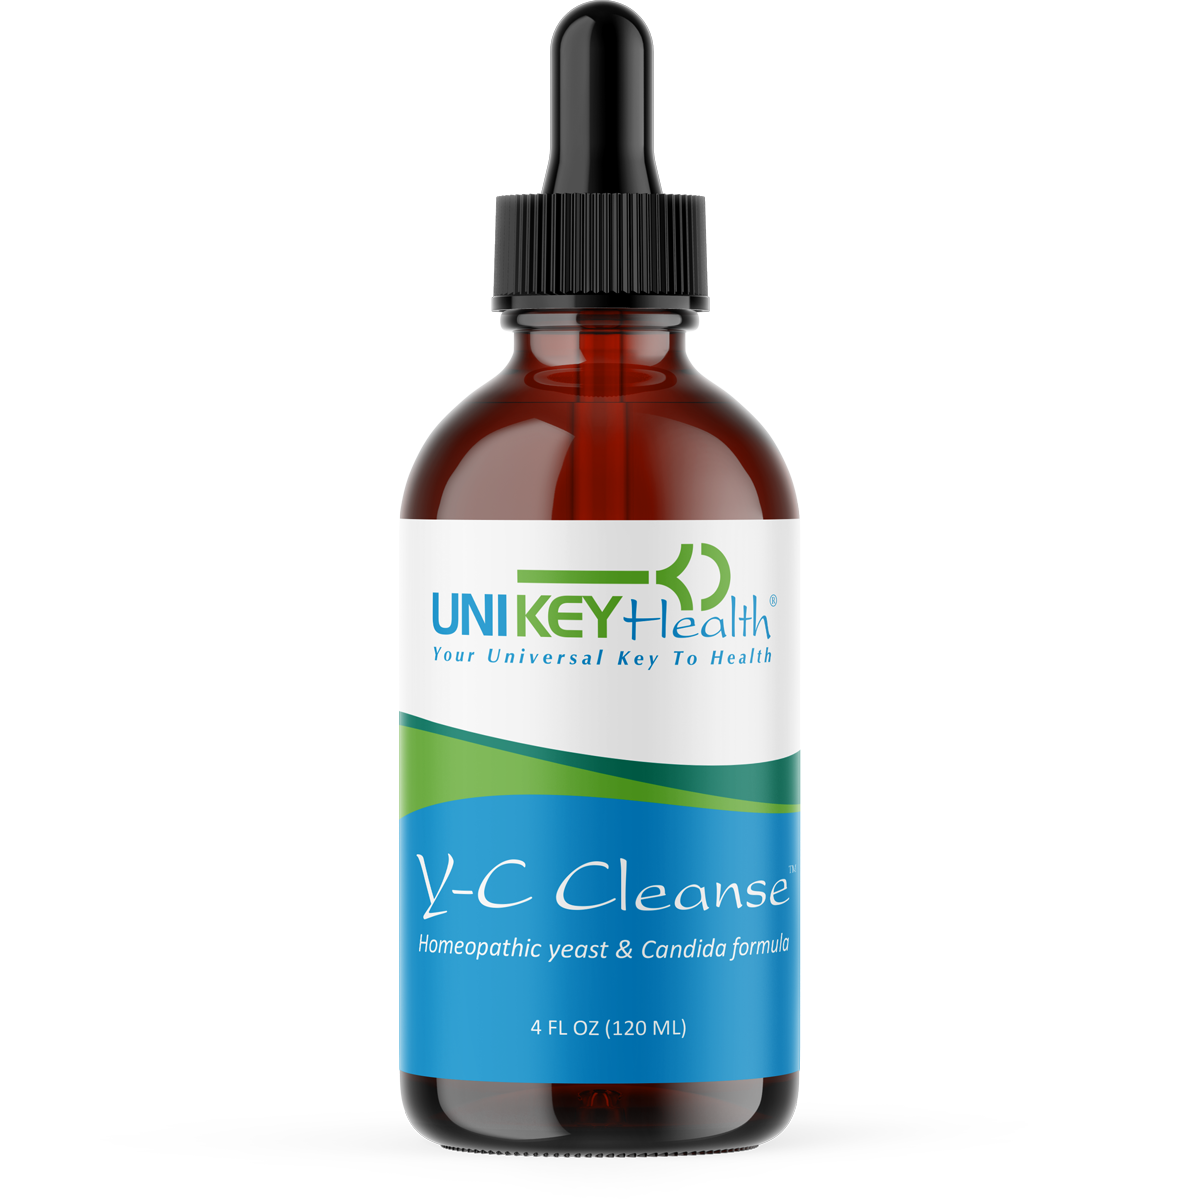 A 5 fl. oz. bottle of UNI KEY Health's Y-C Cleanse, a natural homeopathic yeast and candida formula cleanse.